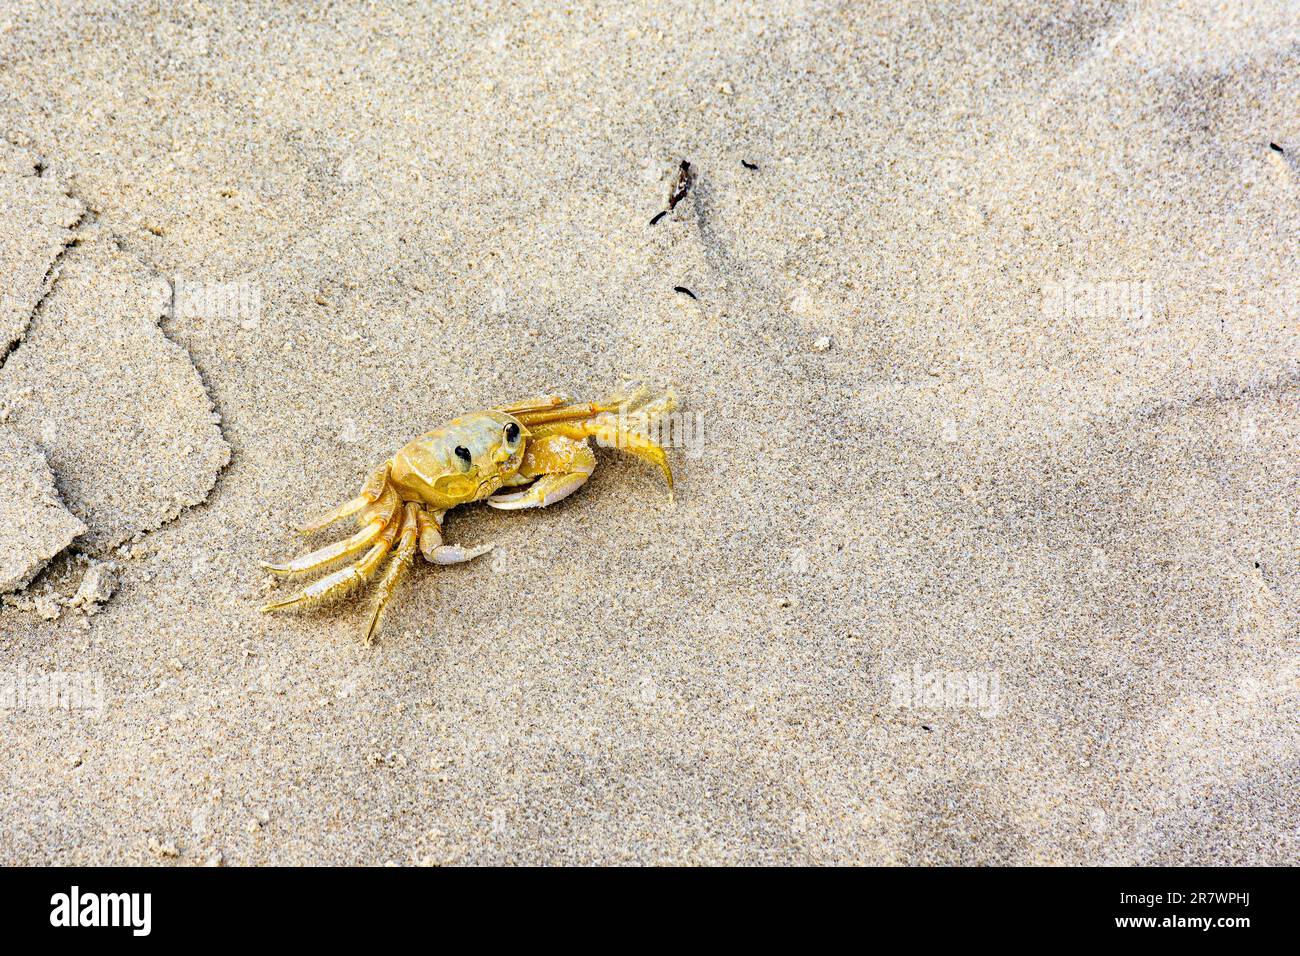 Crab walking on the beach sand in the state of Bahia, Brazil Stock Photo